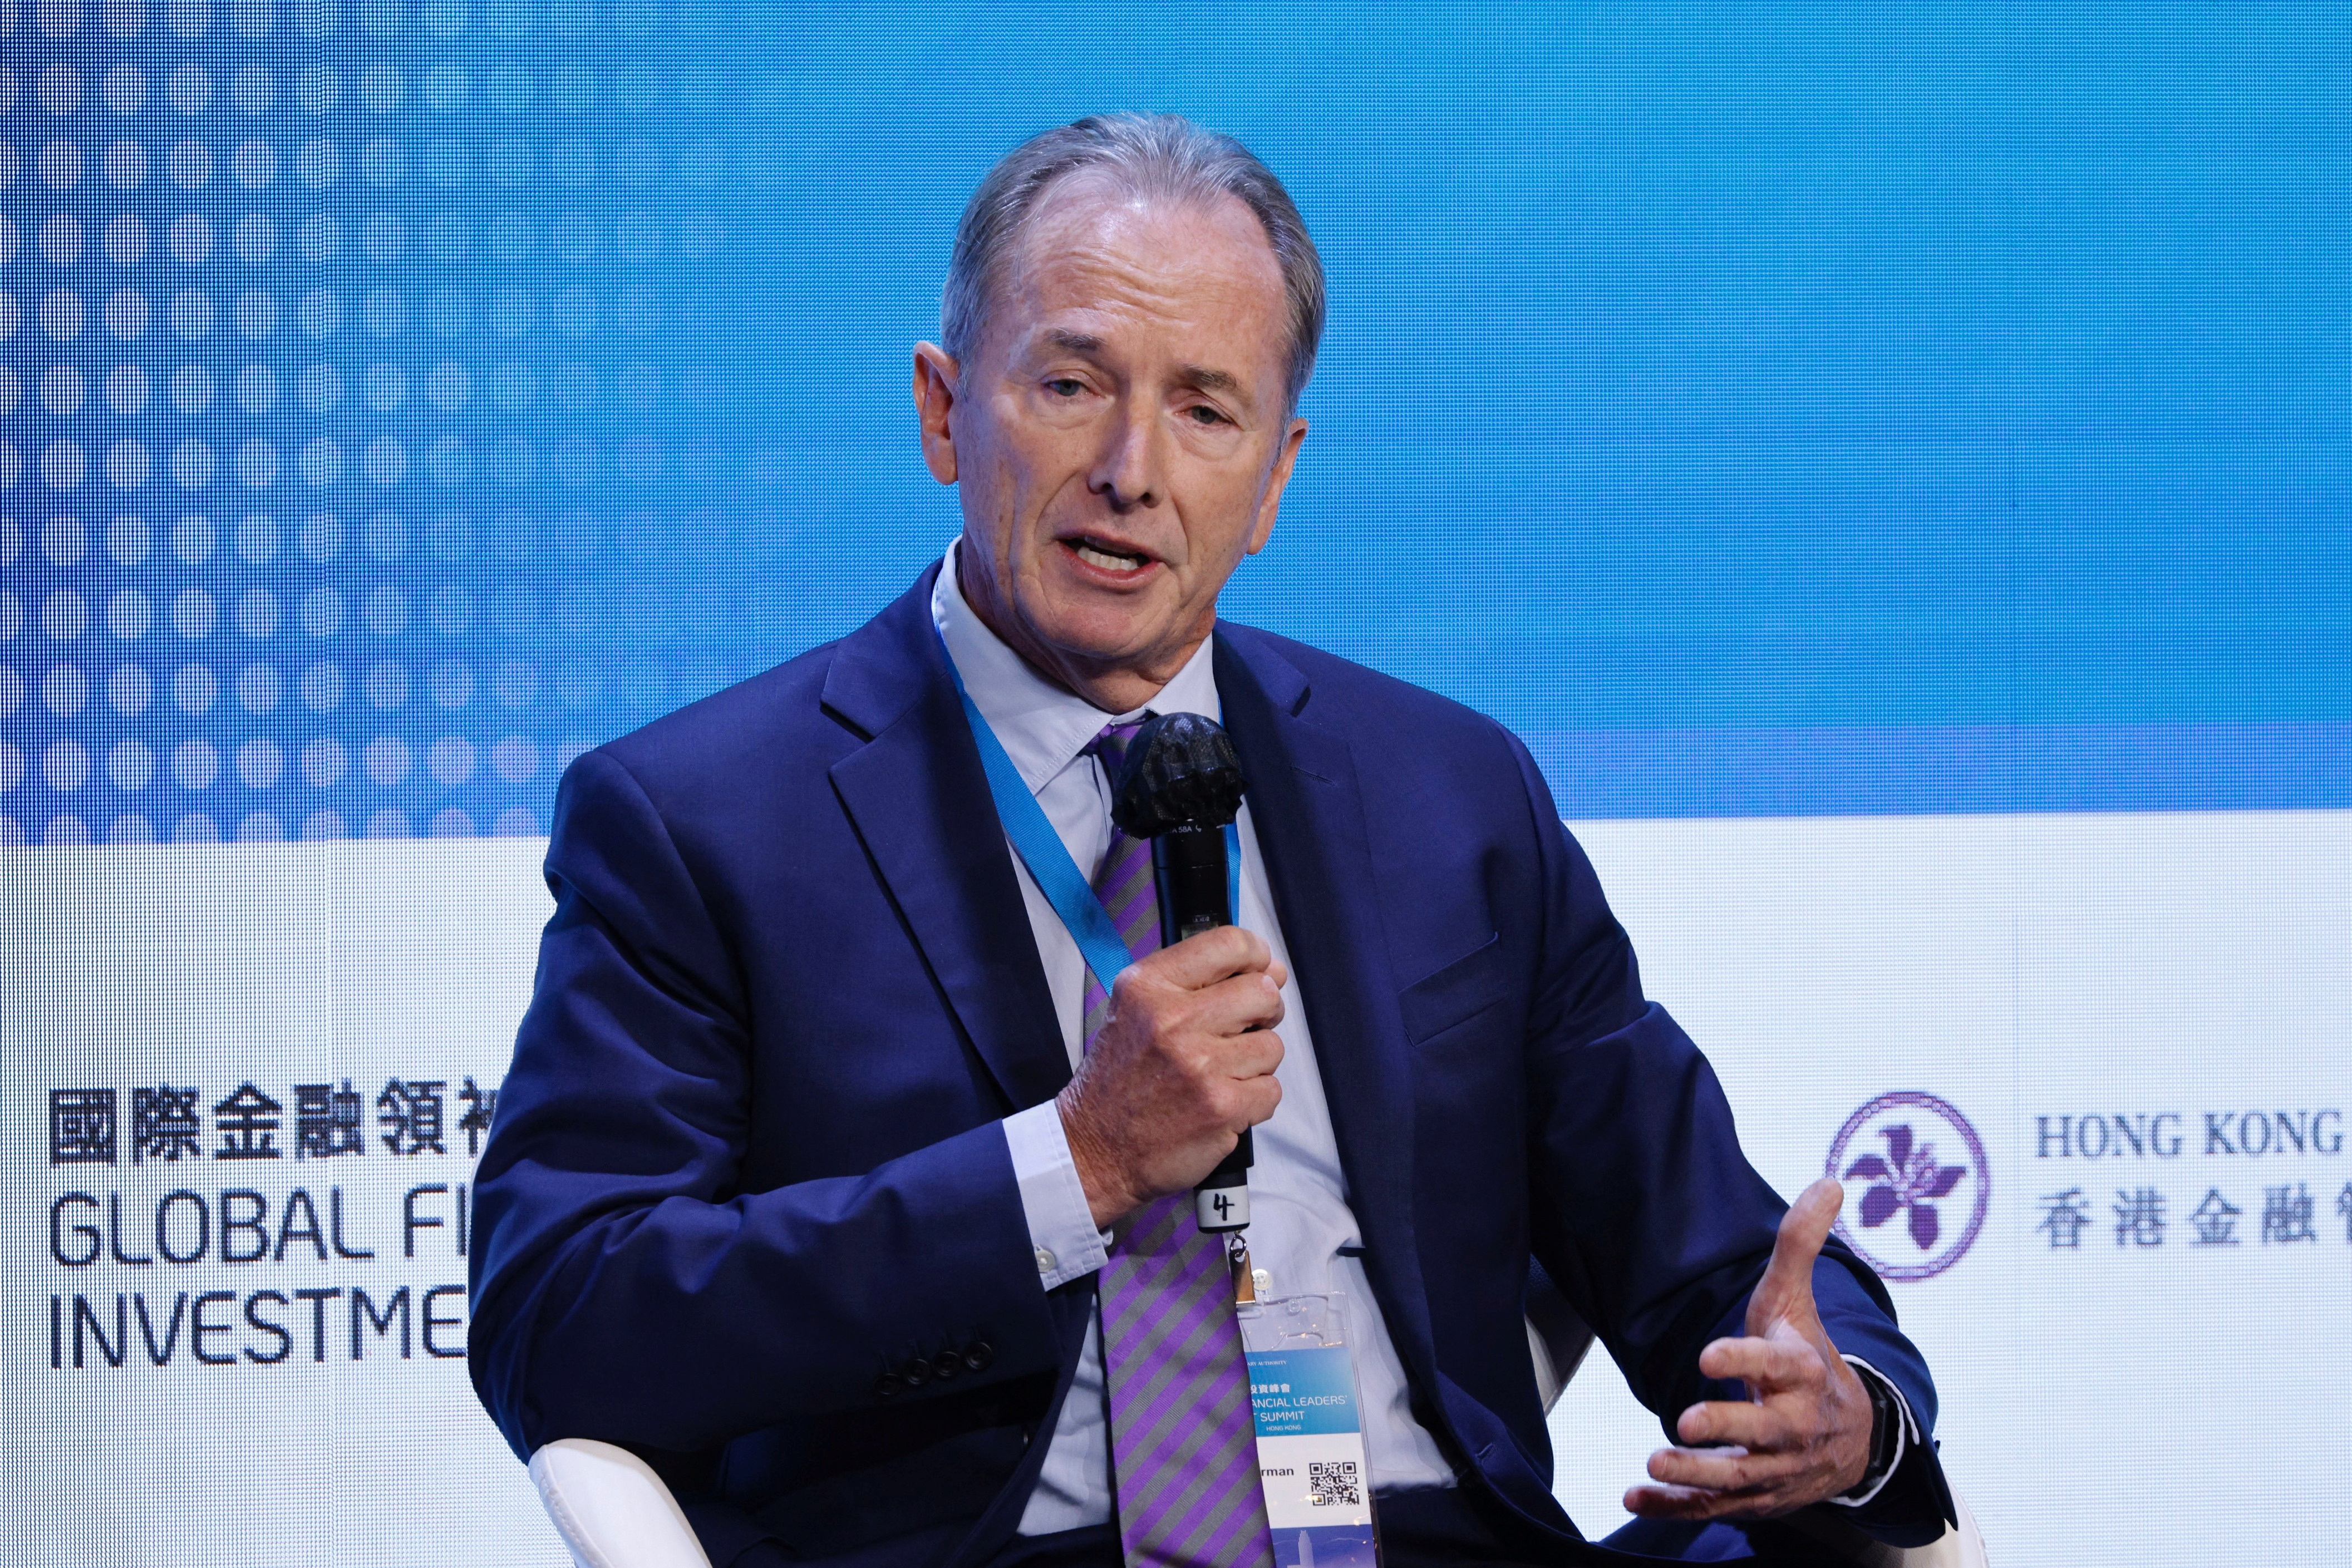 James Gorman, Chairman and Chief Executive of Morgan Stanley, speaks during the Global Financial Leaders Investment Summit in Hong Kong